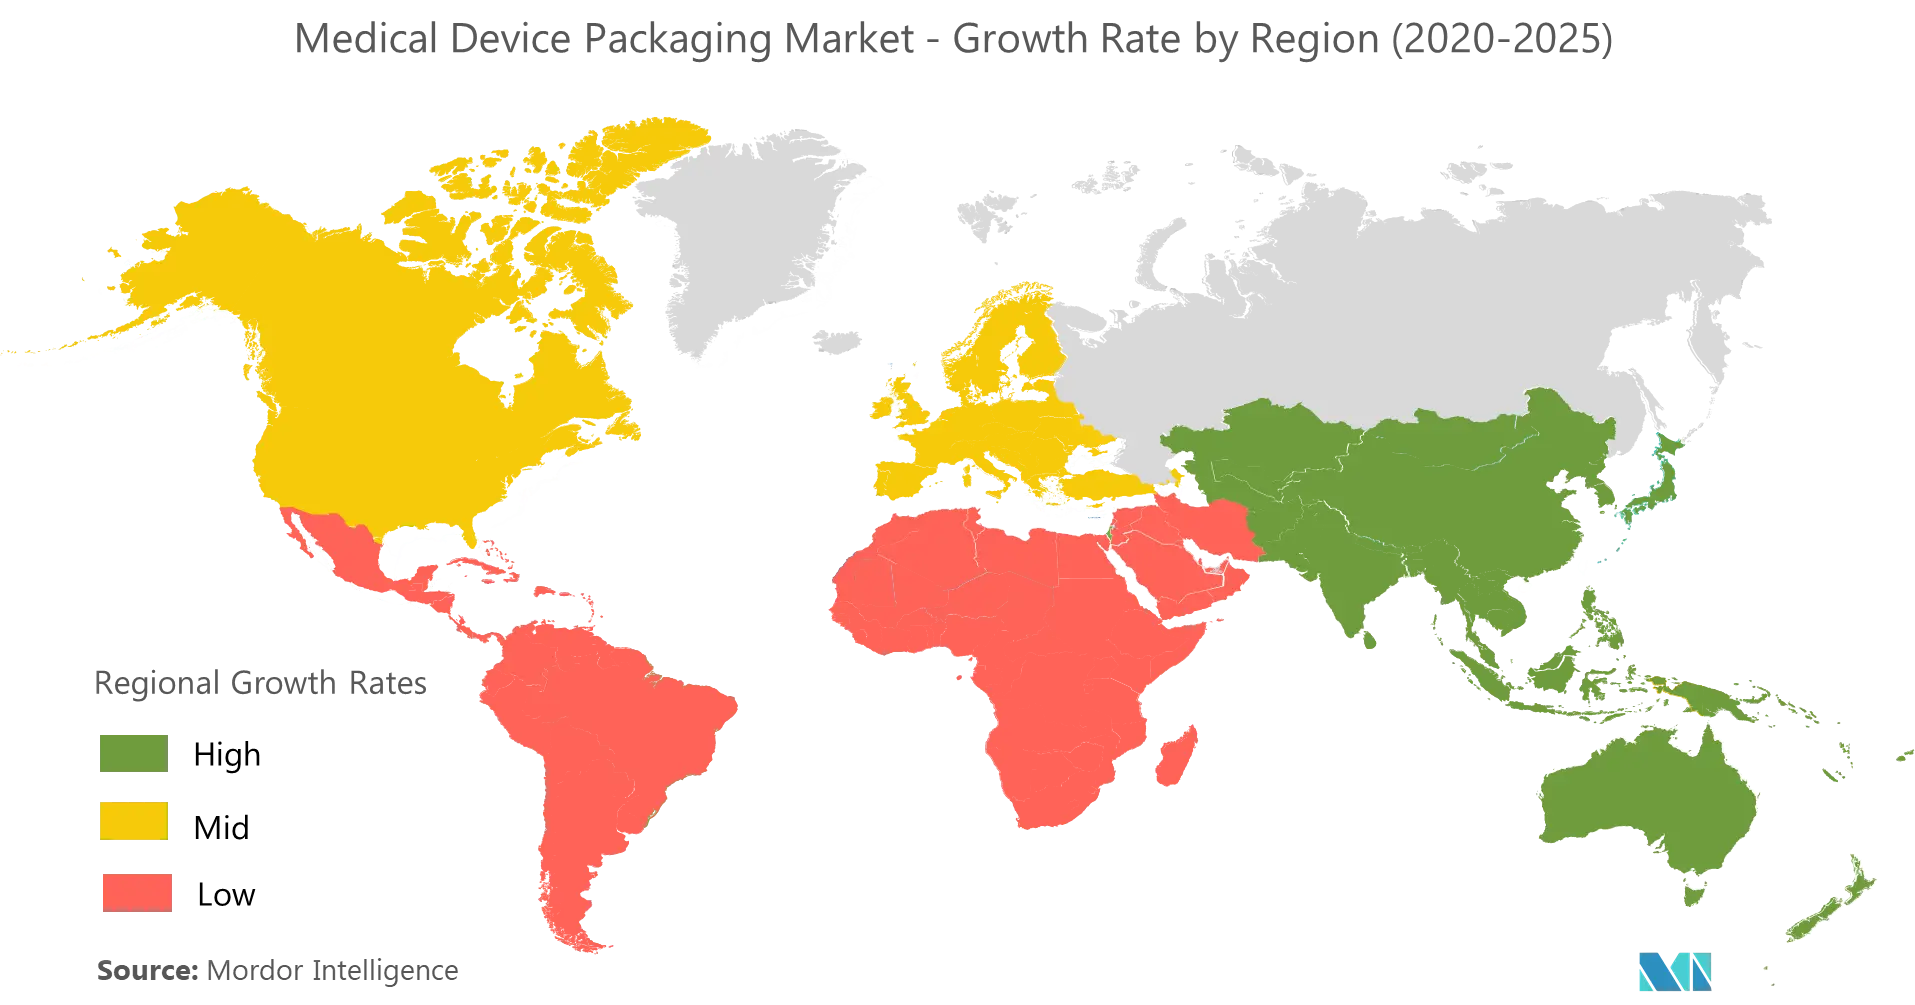 Medical Devices Packaging Market - Growth Rate by Region (2020 - 2025)